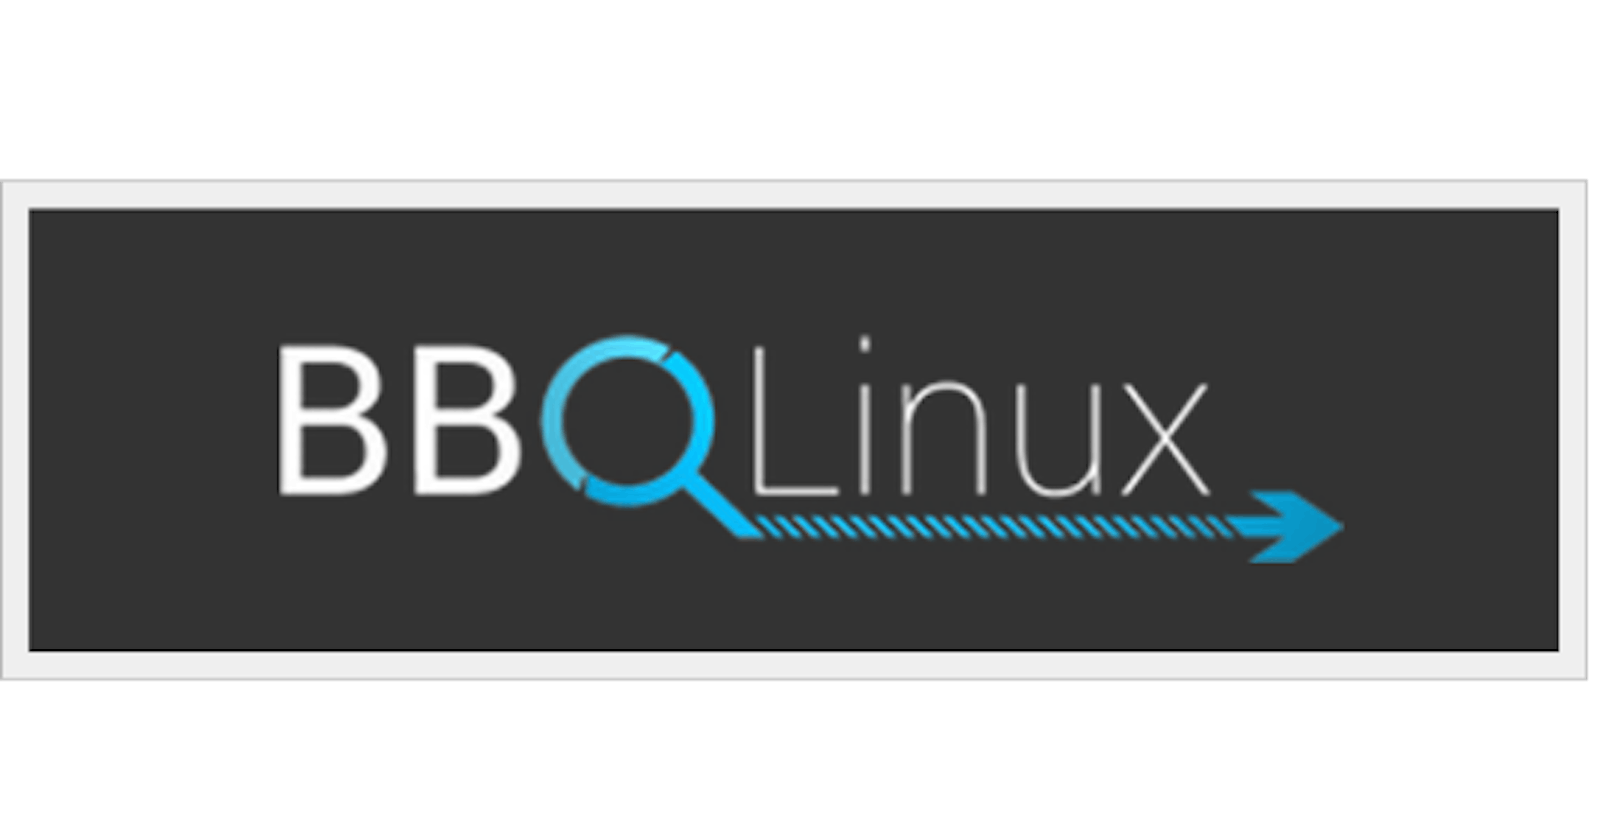 Connect to Speaker with Bluetoothctl in BBQLinux